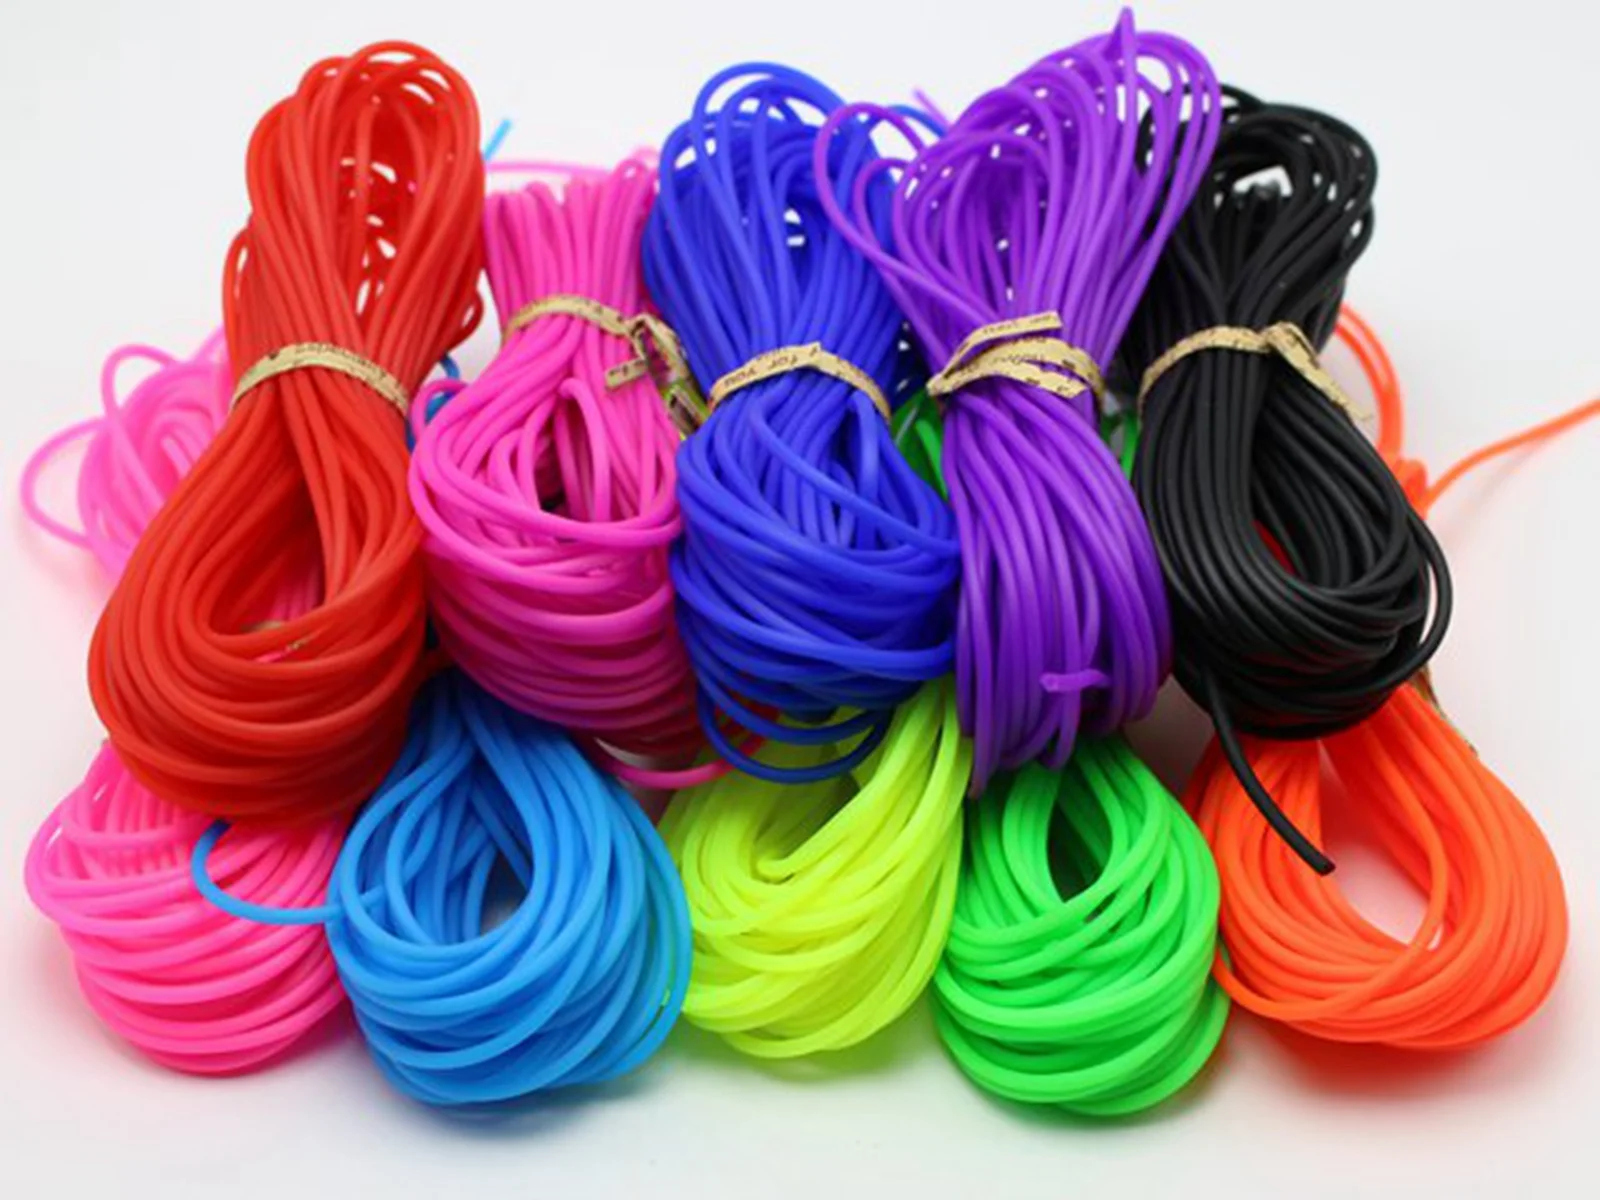 Synthetic Rubber Tube for Crafting Neon, Fluorescent 3mm or 2mm 